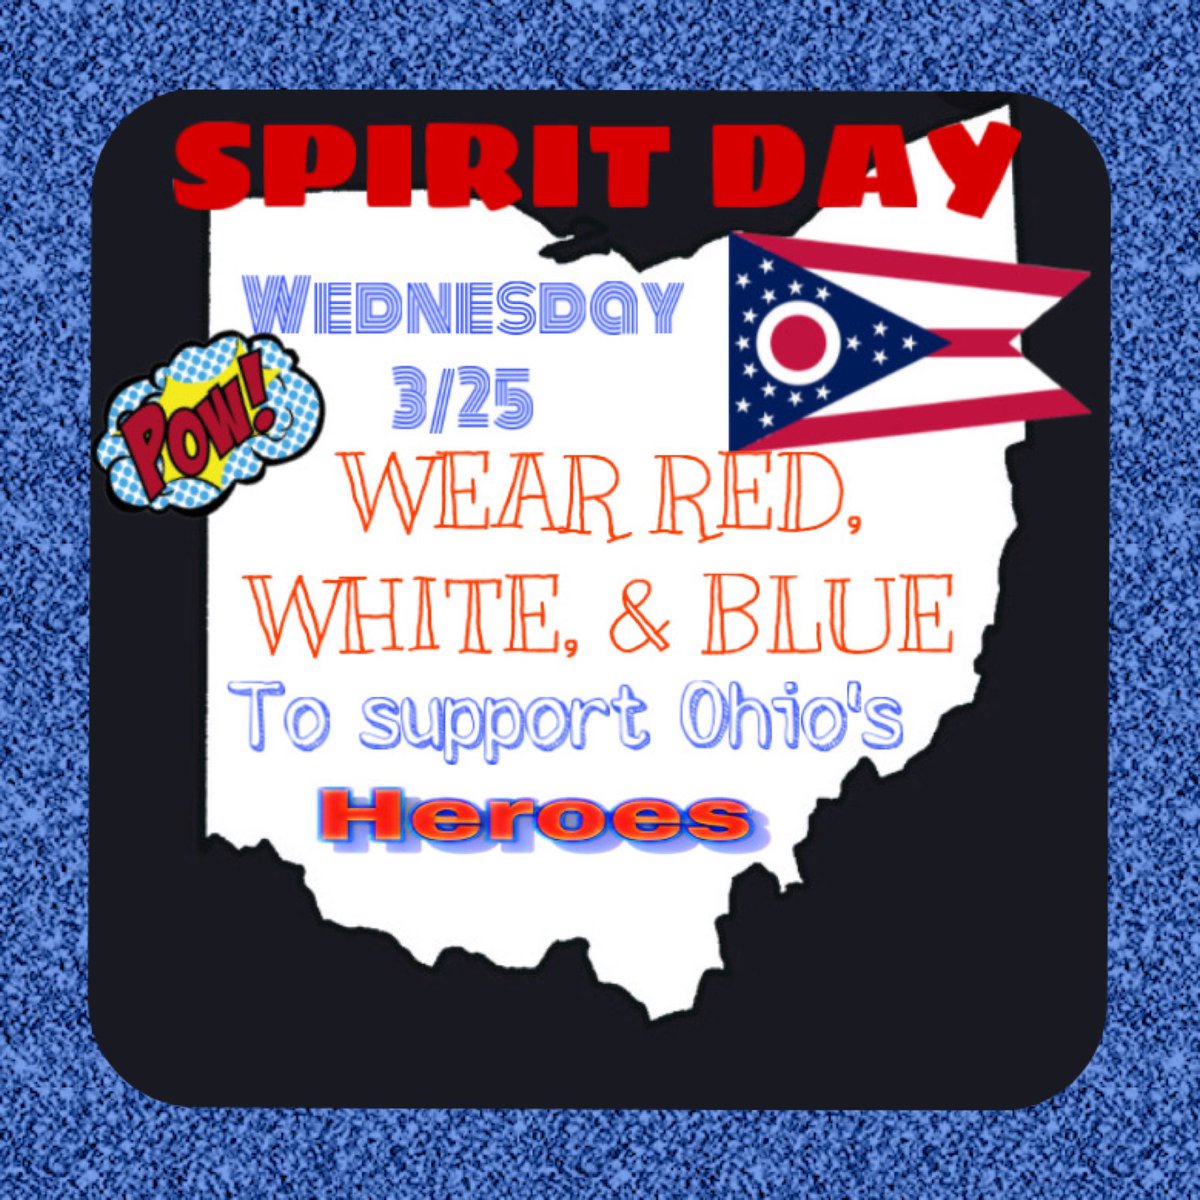 No one has more spirit & sense of support than the cheer & dance community.  Let’s join together & spread the word. On WED, 3/25, wear red, white, and blue. Show your appreciation for Ohio’s heroes. Be sure to use #ohsdcaconnects  & #showyourspirit and tell us who YOUR hero is.